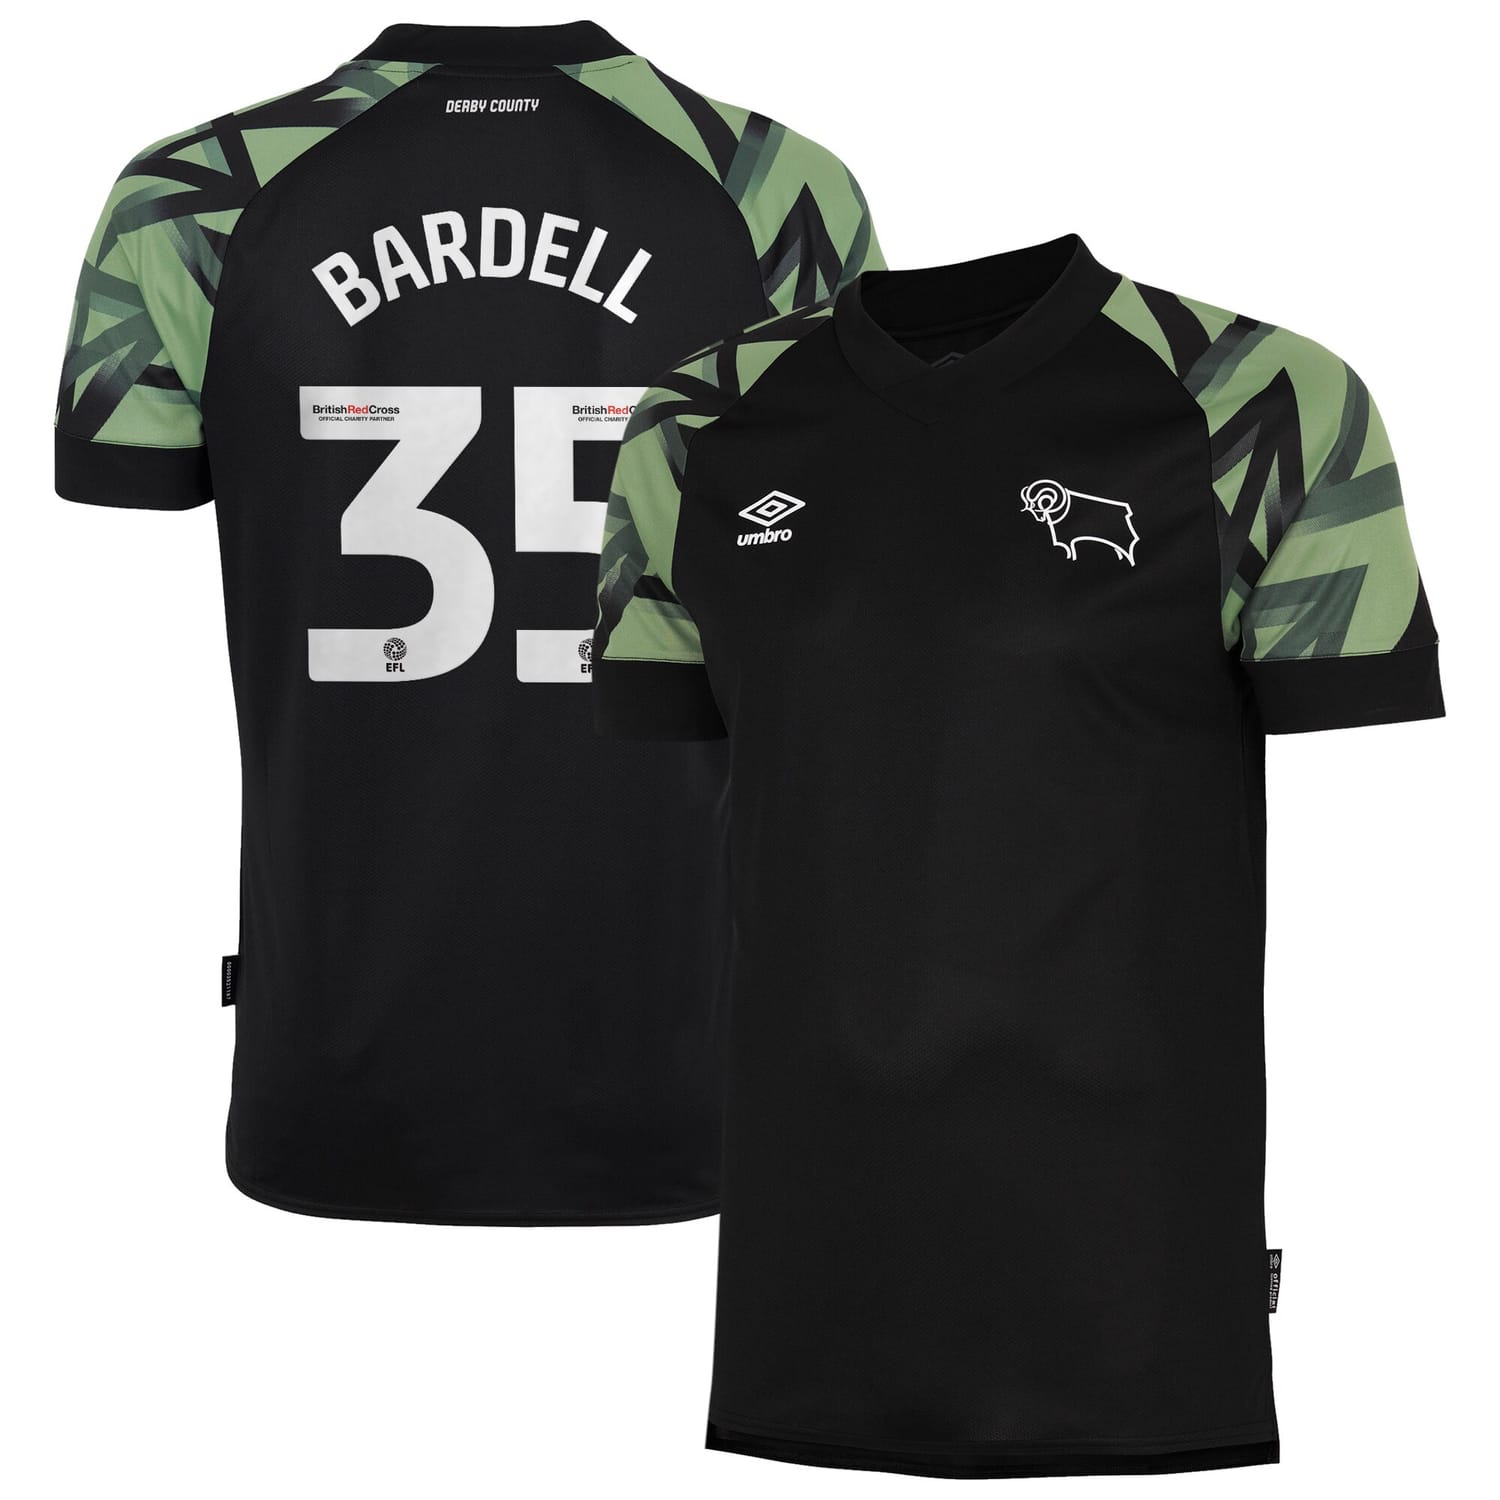 EFL League One Derby County Away Jersey Shirt 2022-23 player Max Bardell 35 printing for Men